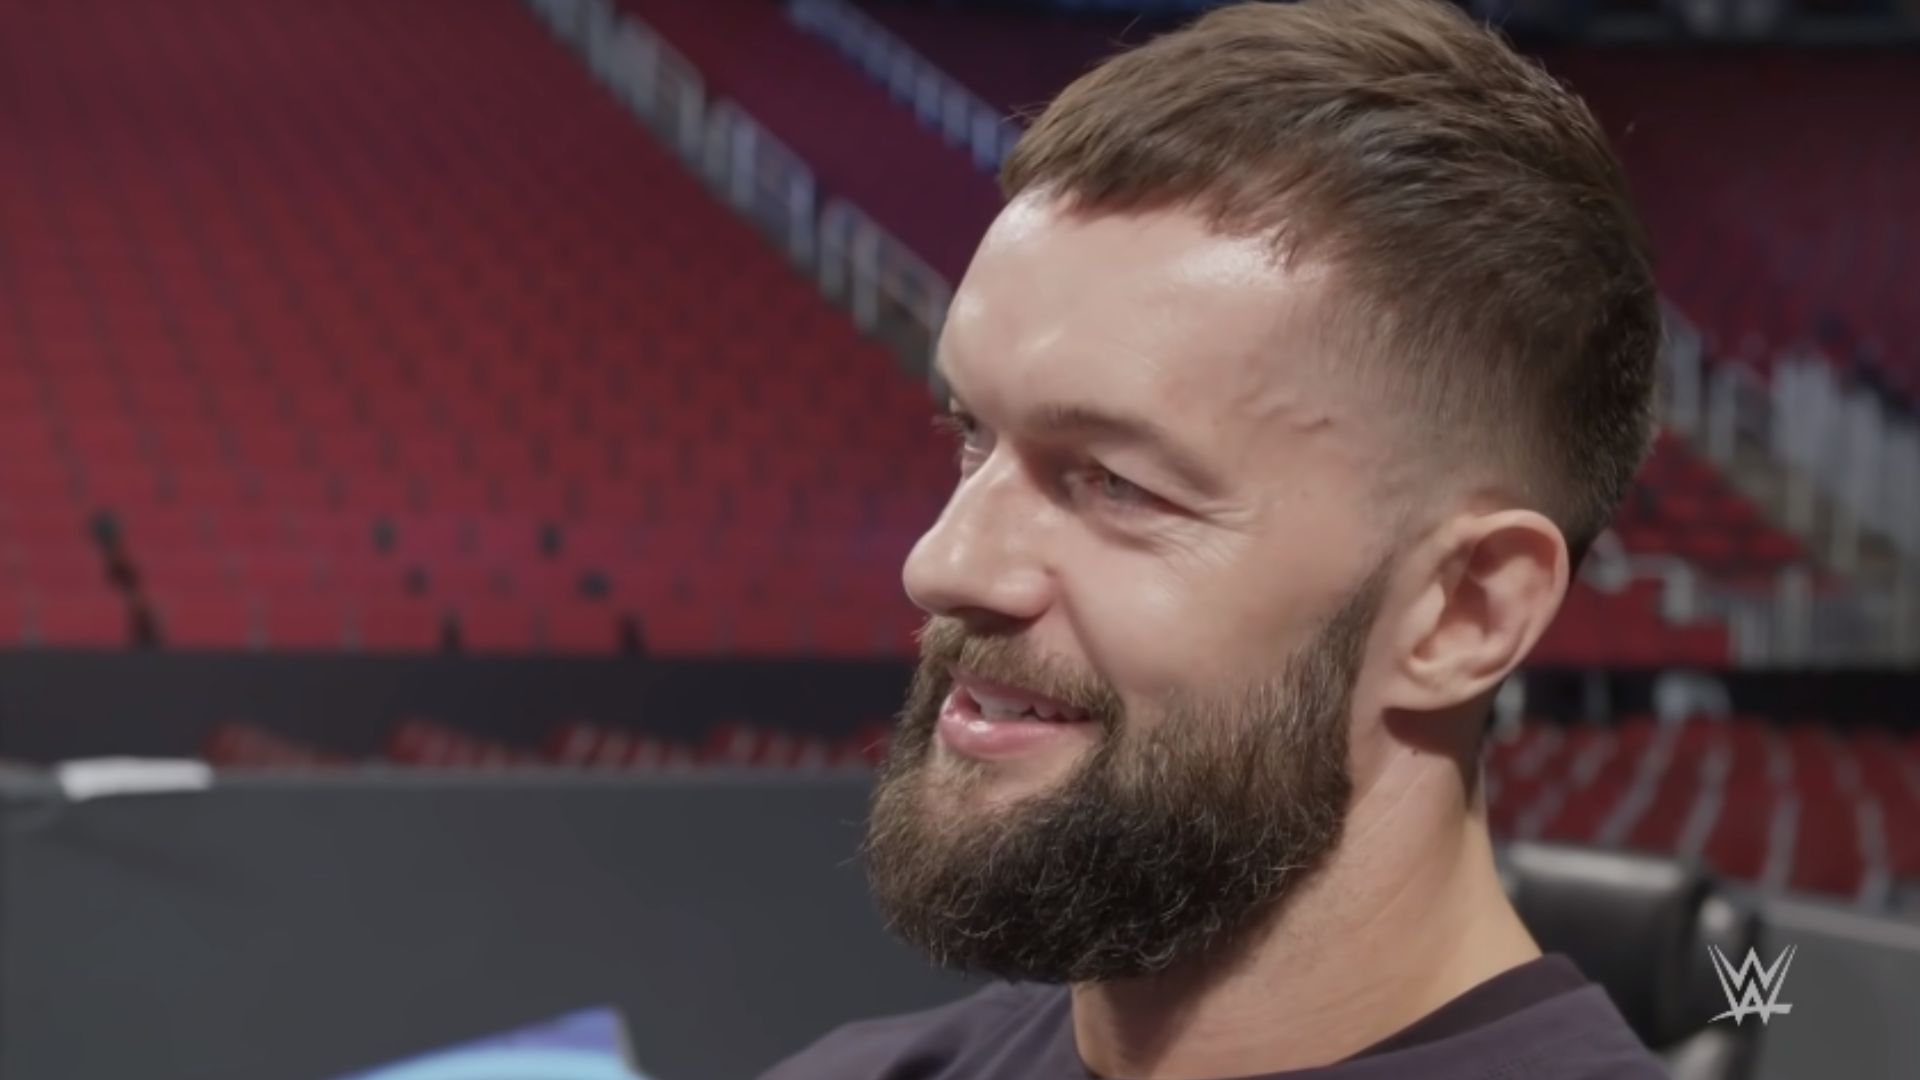 Finn Balor competed in NXT at the same time as AOP